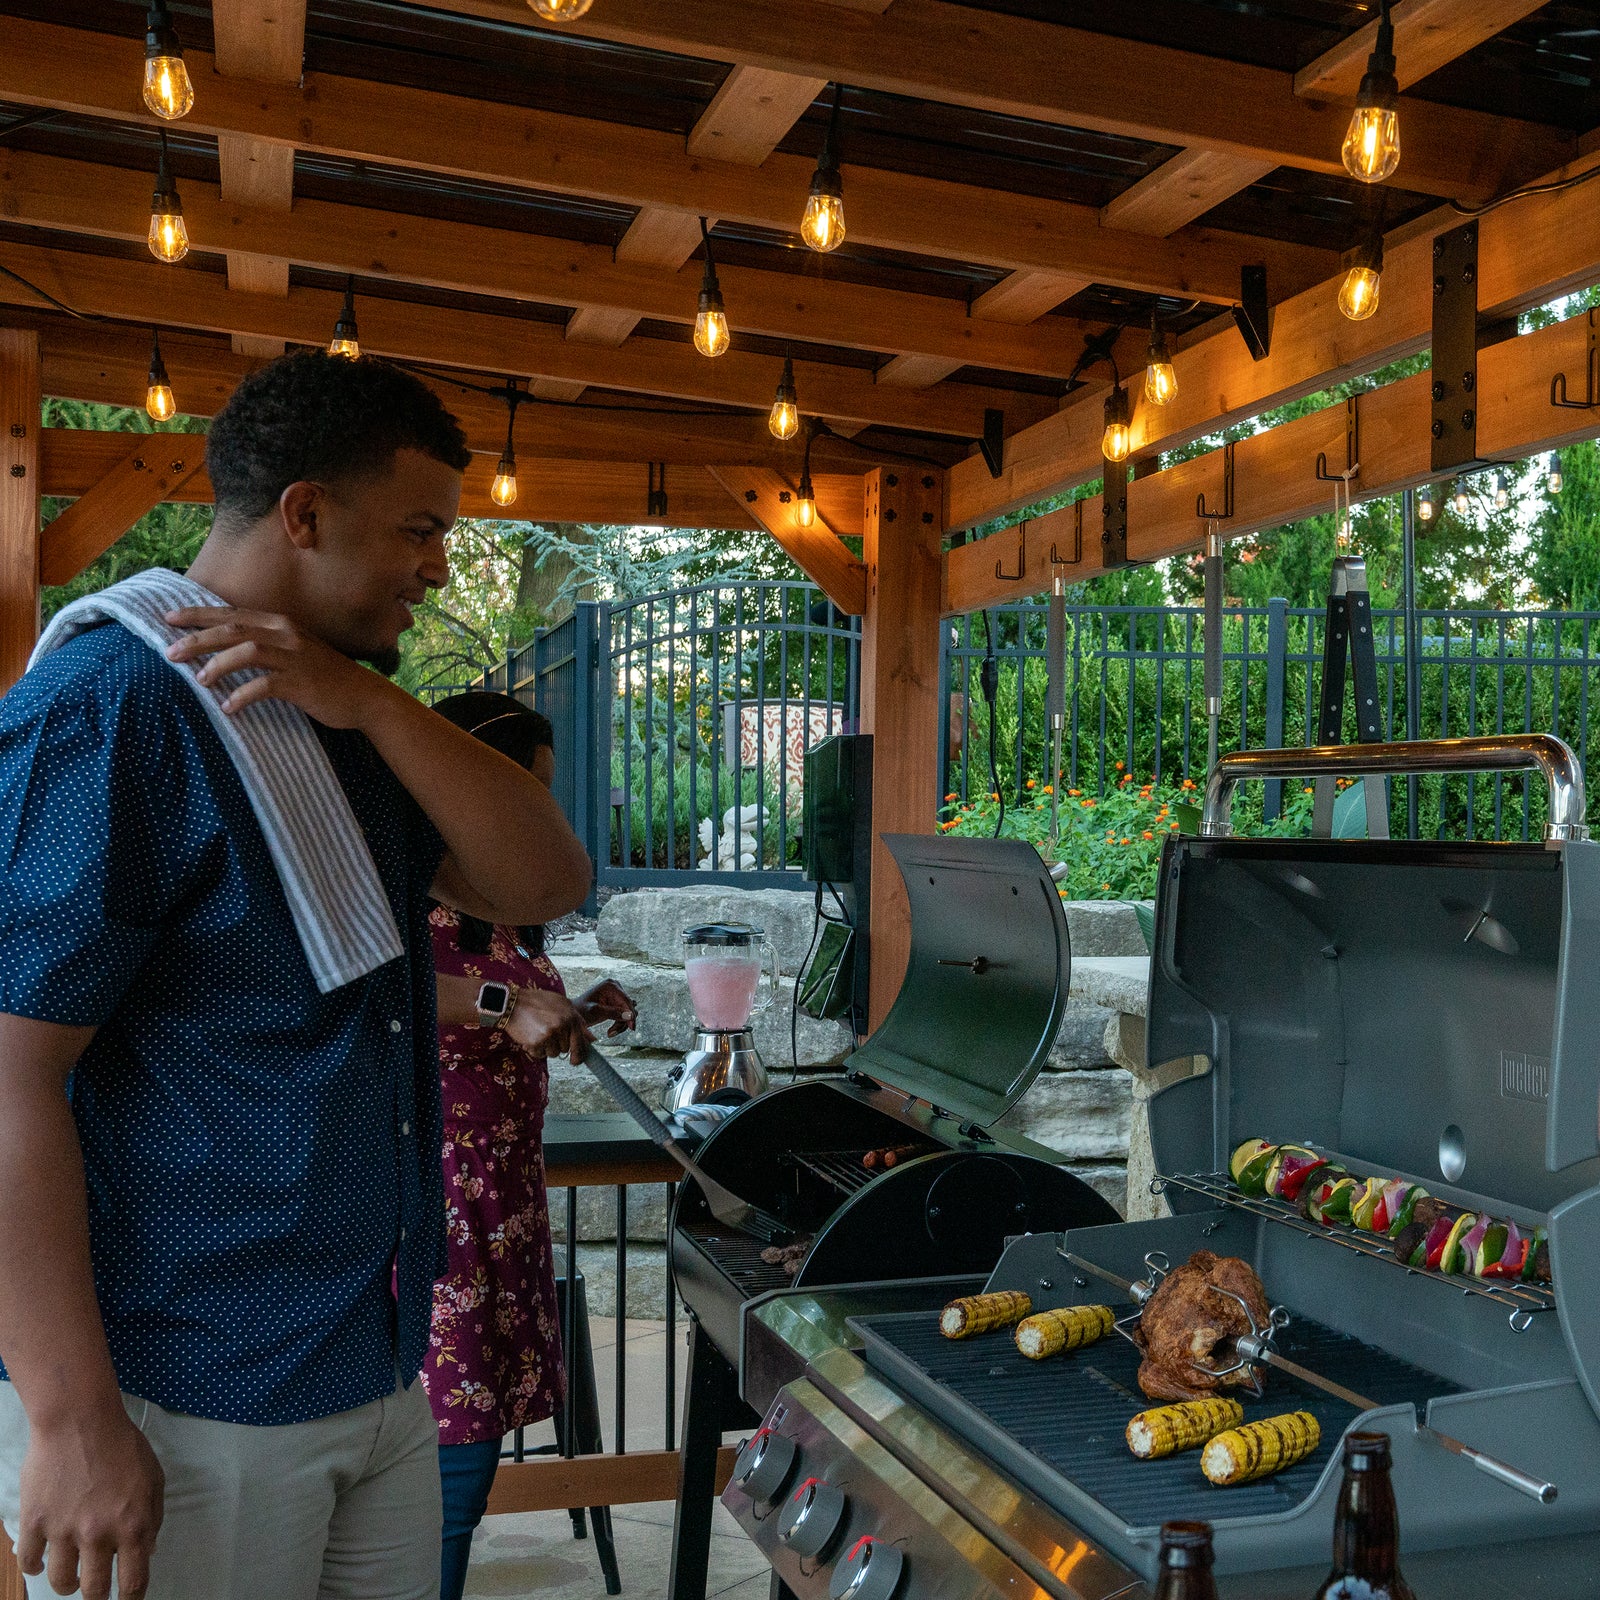 Best Electric BBQ - Grillo  Beautiful Outdoor Kitchens